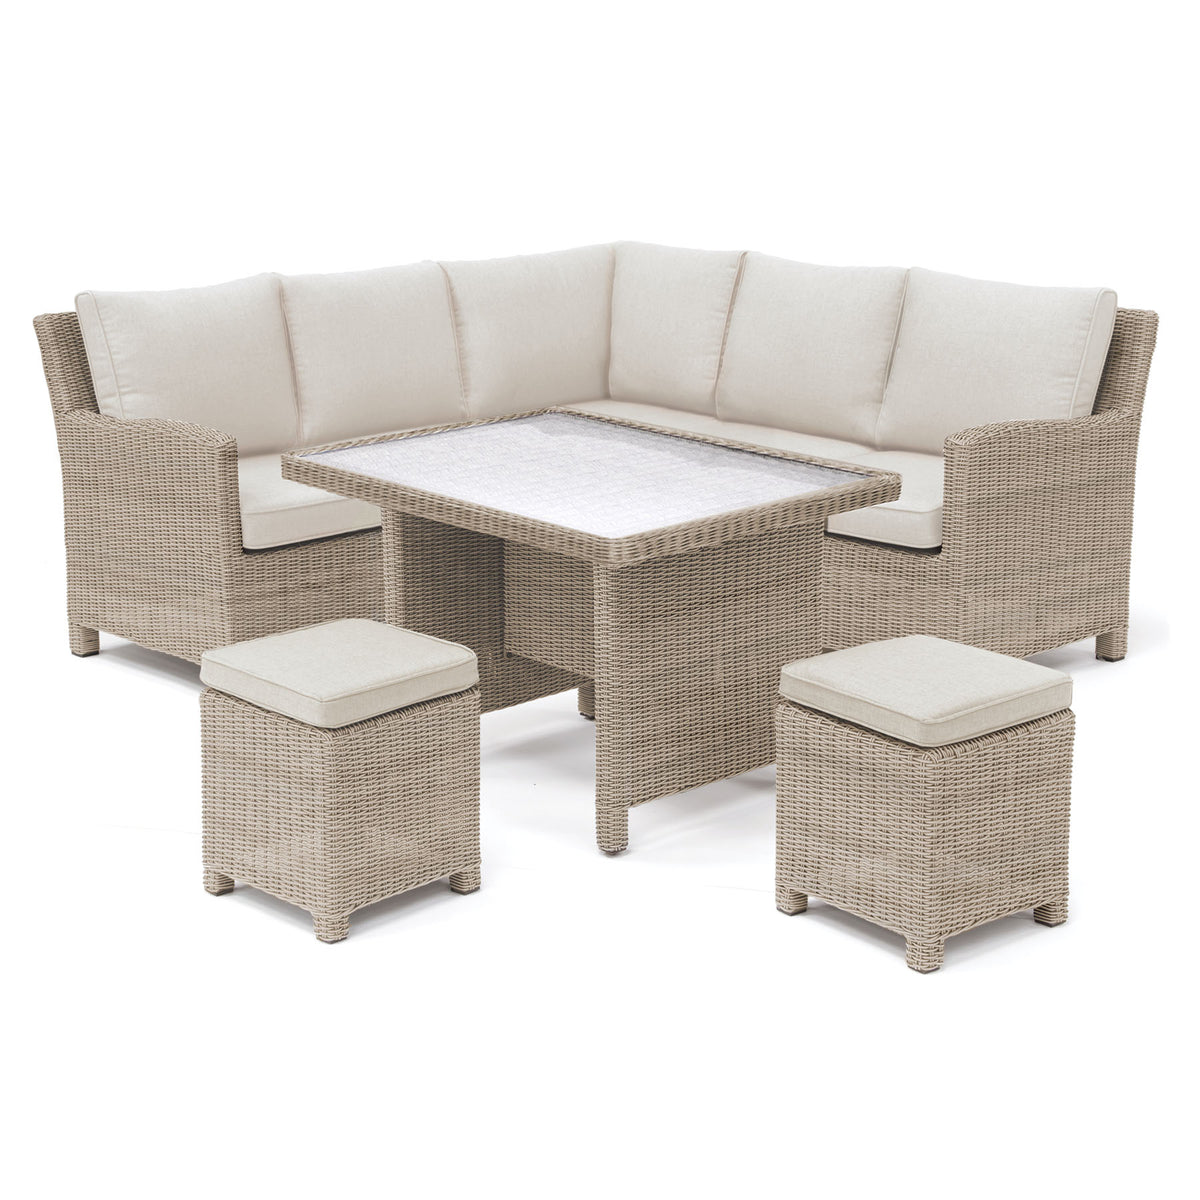 Kettler Palma Mini Corner Oyster Wicker Outdoor Sofa Set with Glass Top Table